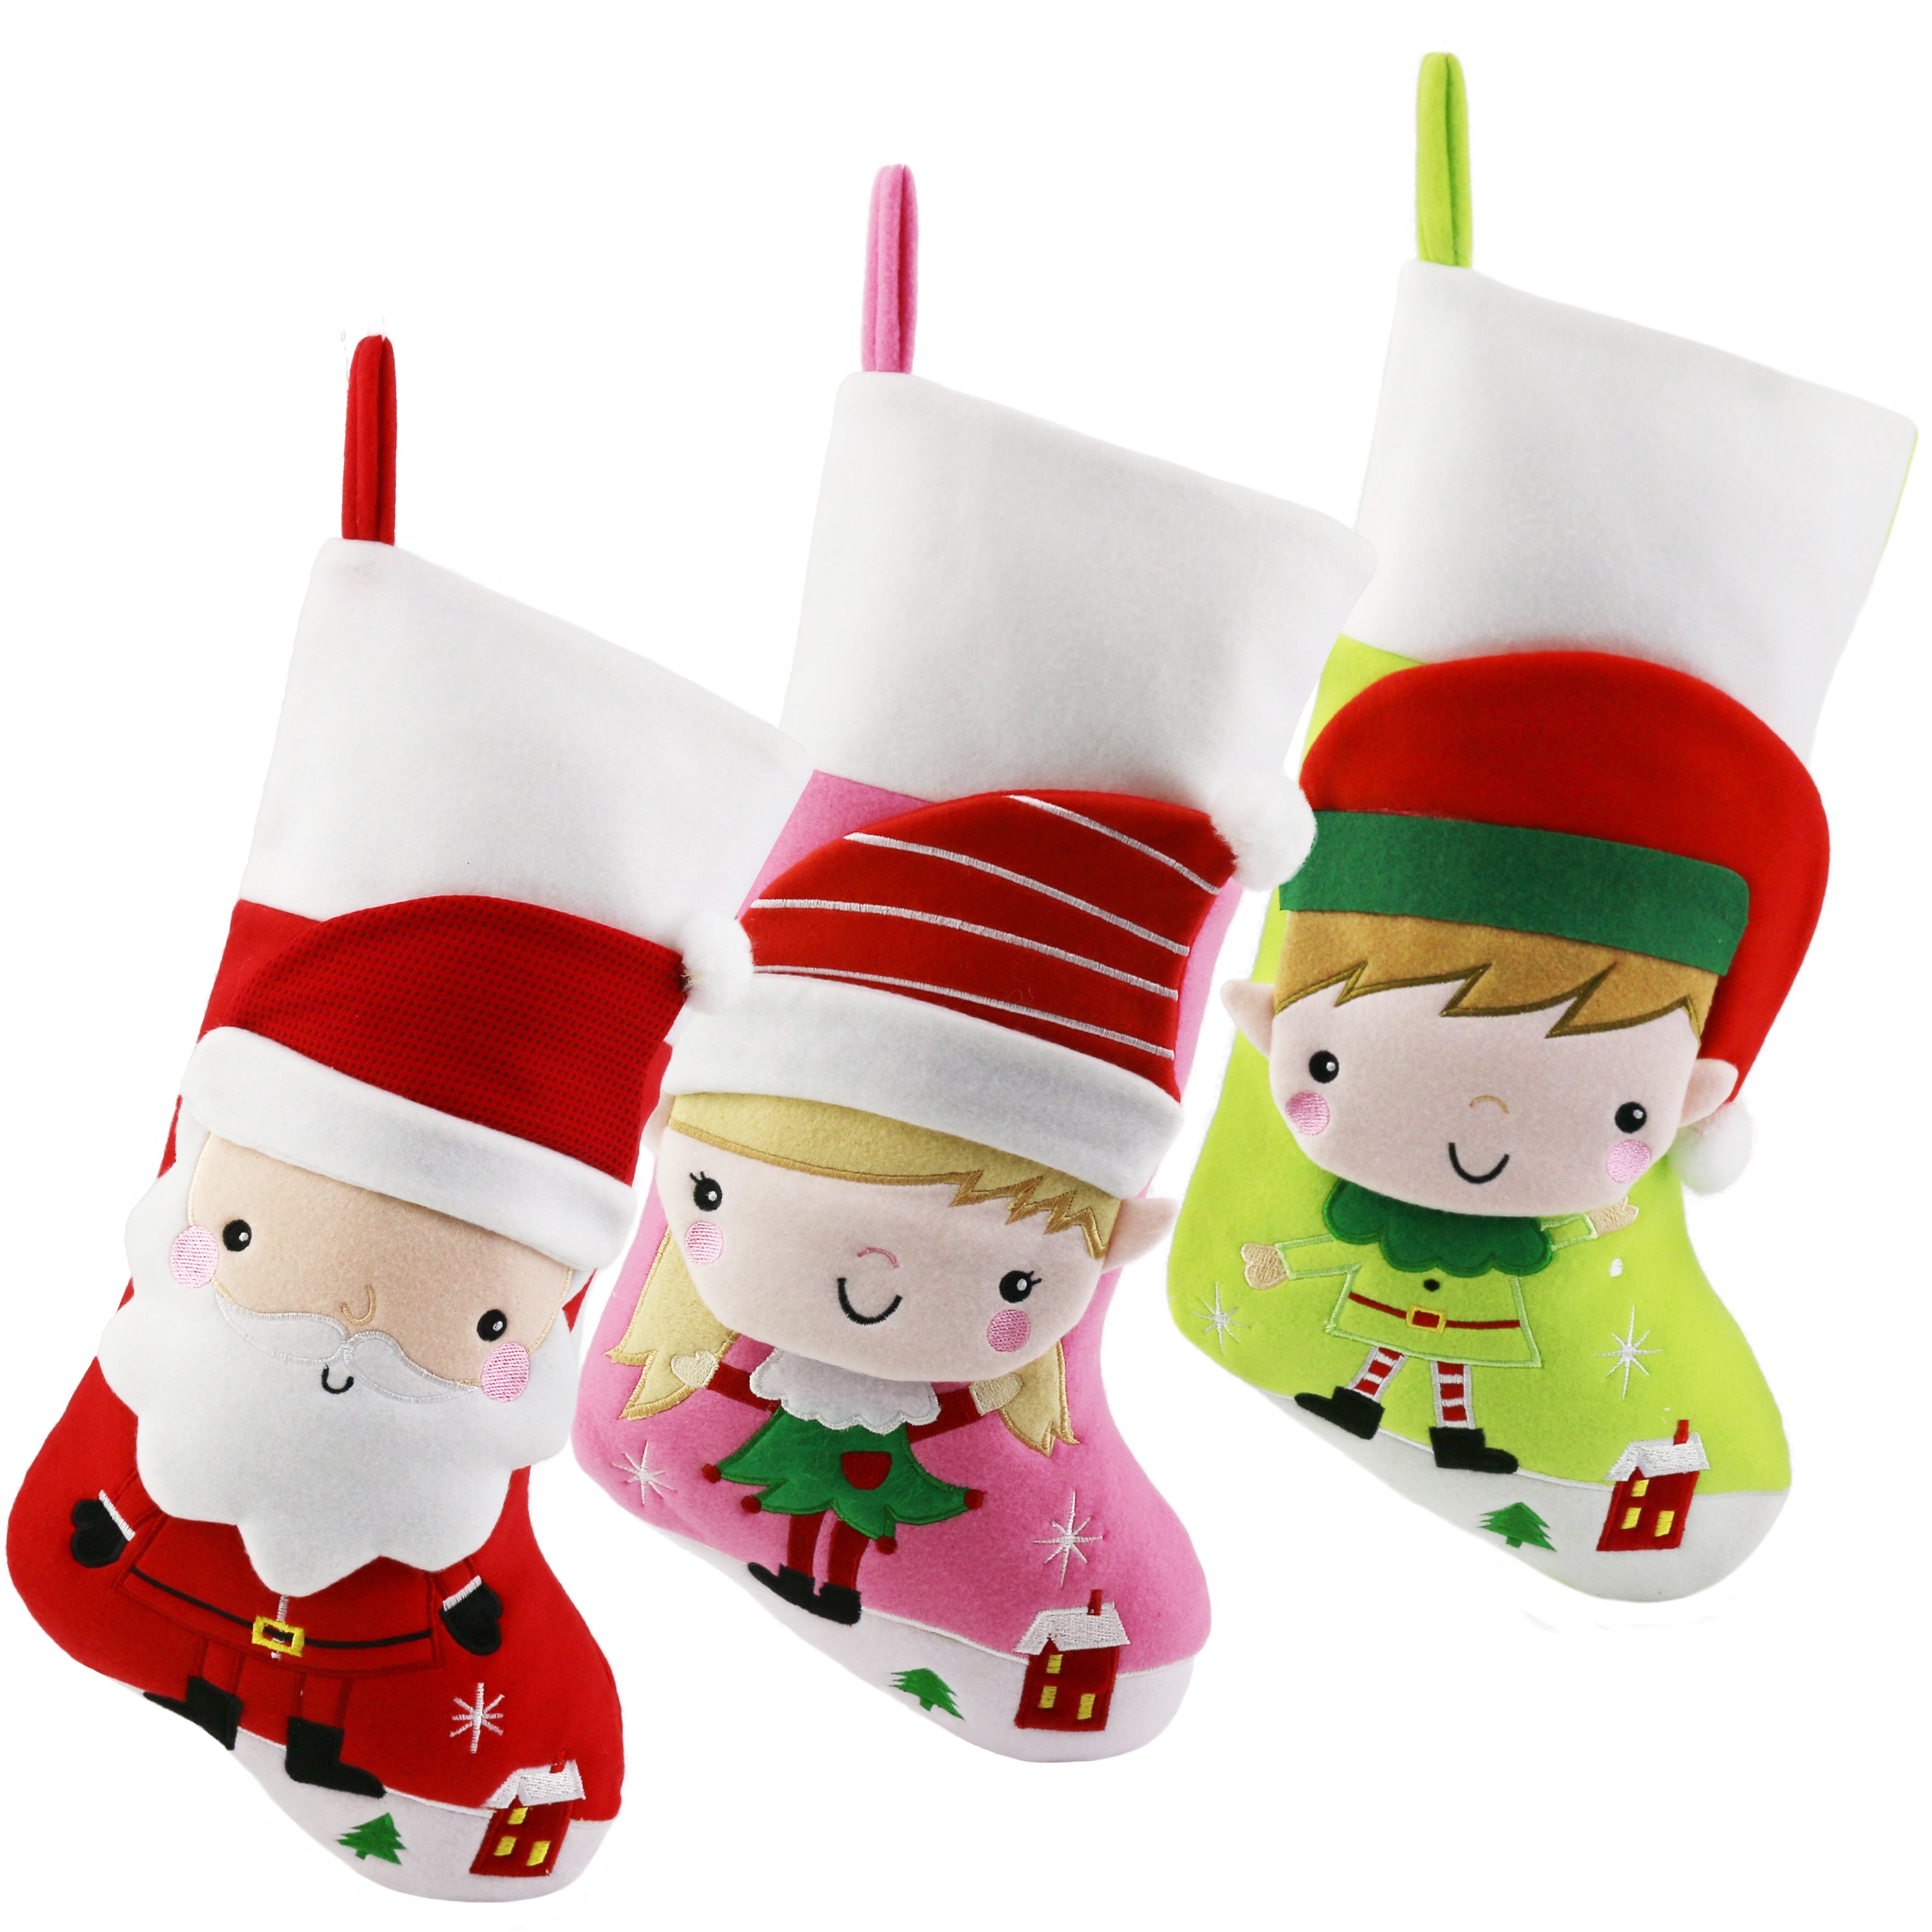 3D Christmas stockings cartoon for family, 16'', 3pcs | Bstaofy - Glow Guards